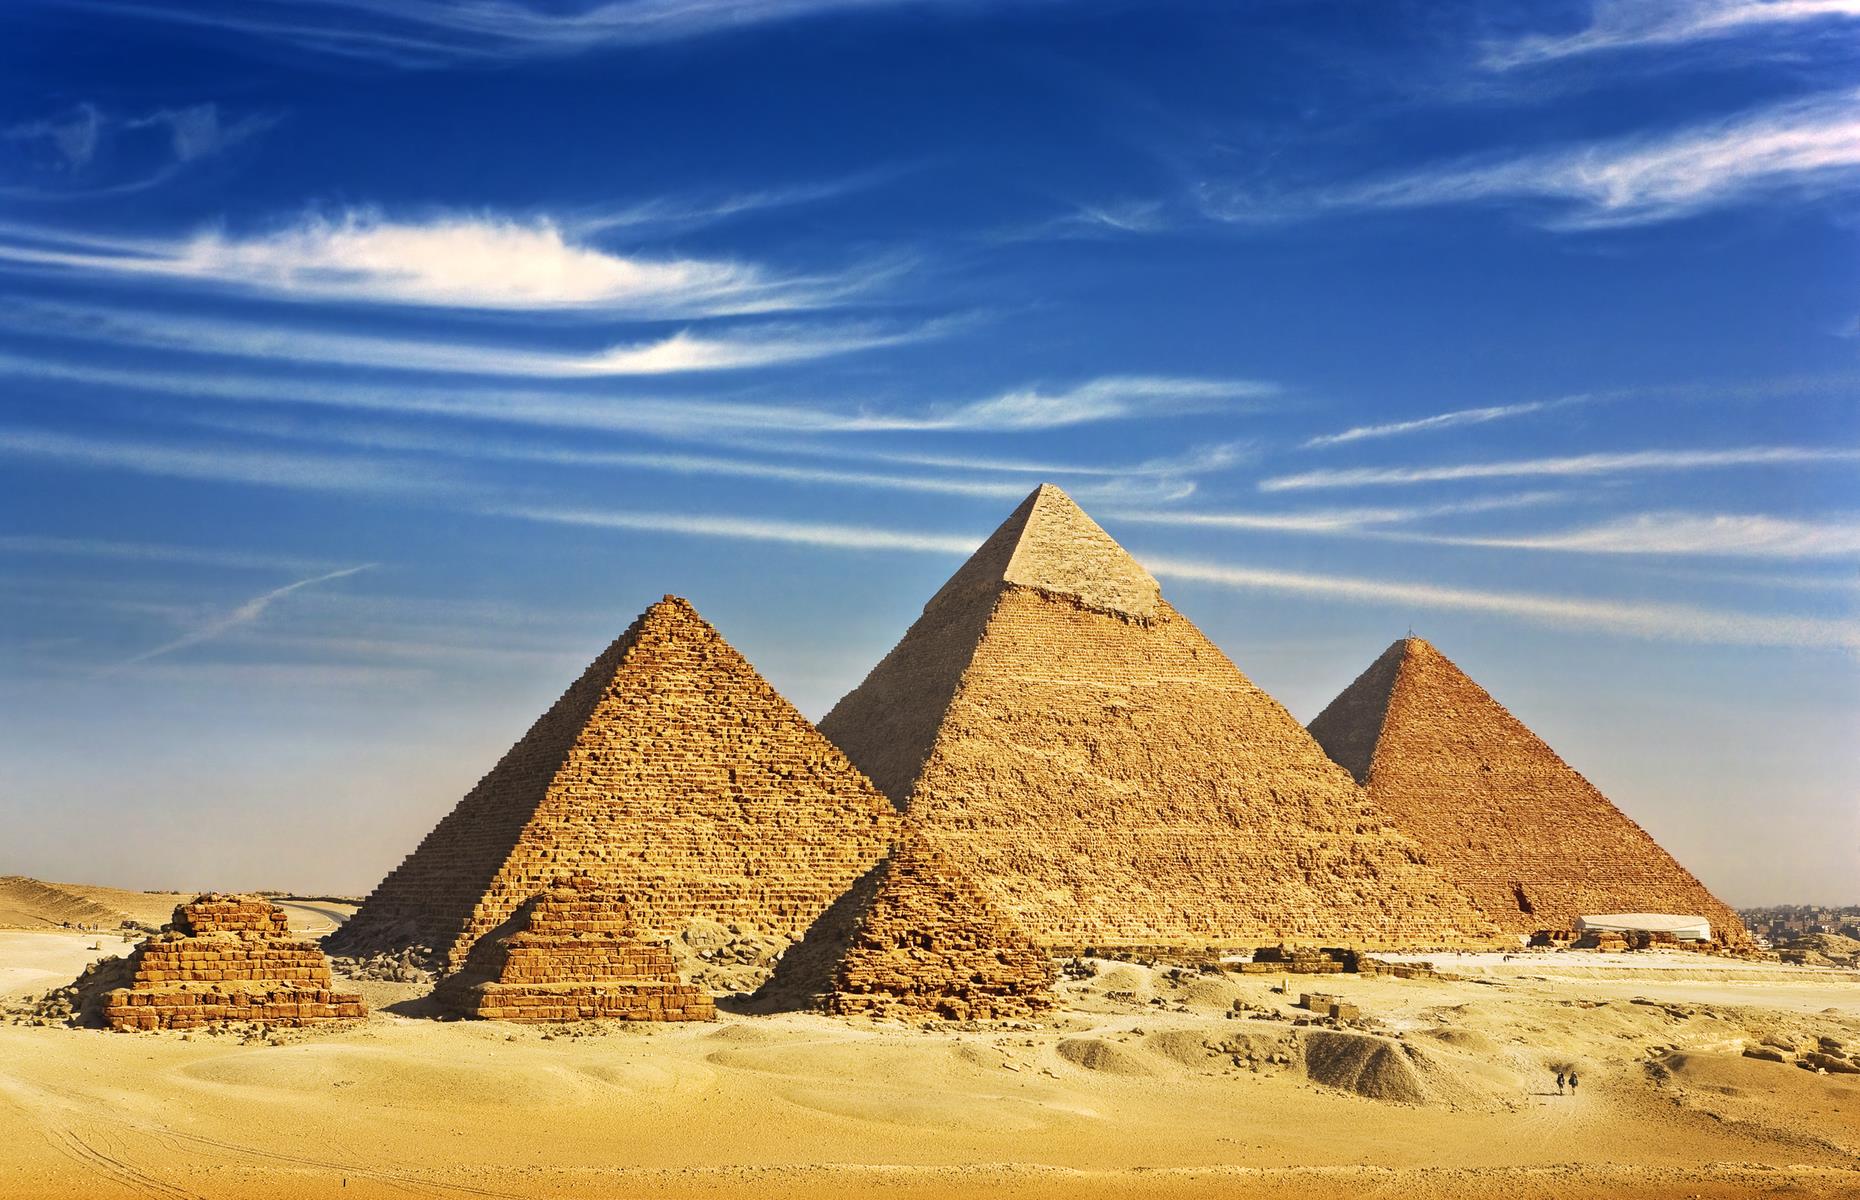 Built between 2584 BC and 2561 BC, the Great Pyramid of Giza is the only surviving of the Seven Wonders of the Ancient World and has enthralled travellers for millennia. As you see the gargantuan structure and the other pyramids rise from the desert just outside of Cairo, you can't fail to be awed by the enormity of their size and history.